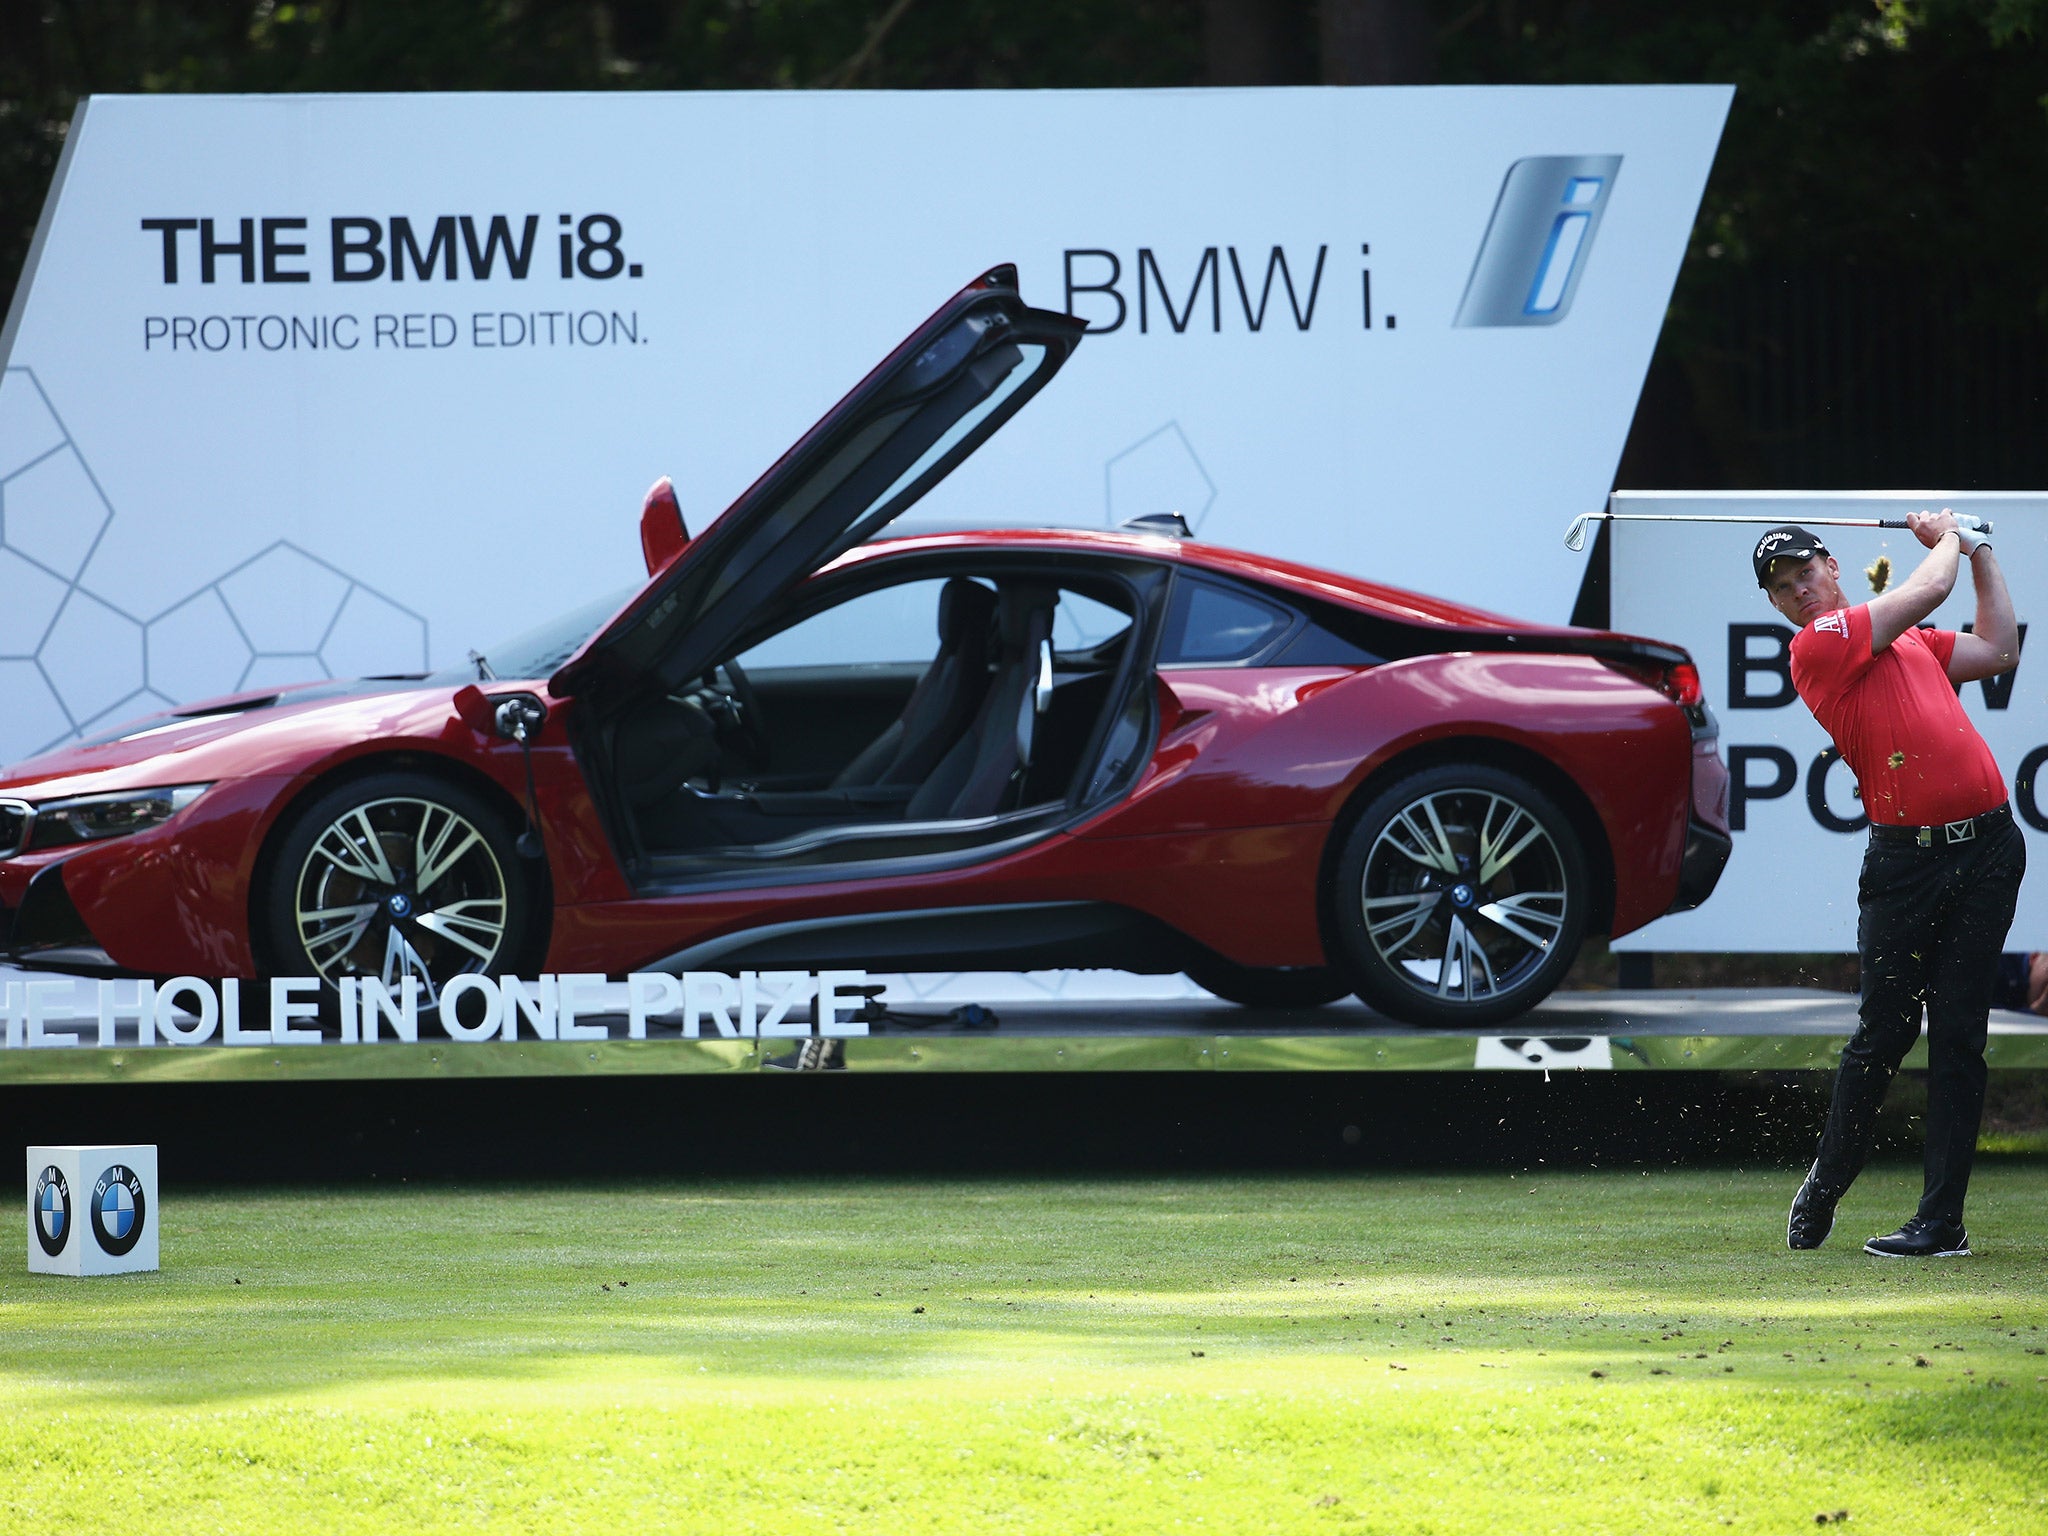 A BMW i8 is available for anyone who hits a hole-in-one on the 14th